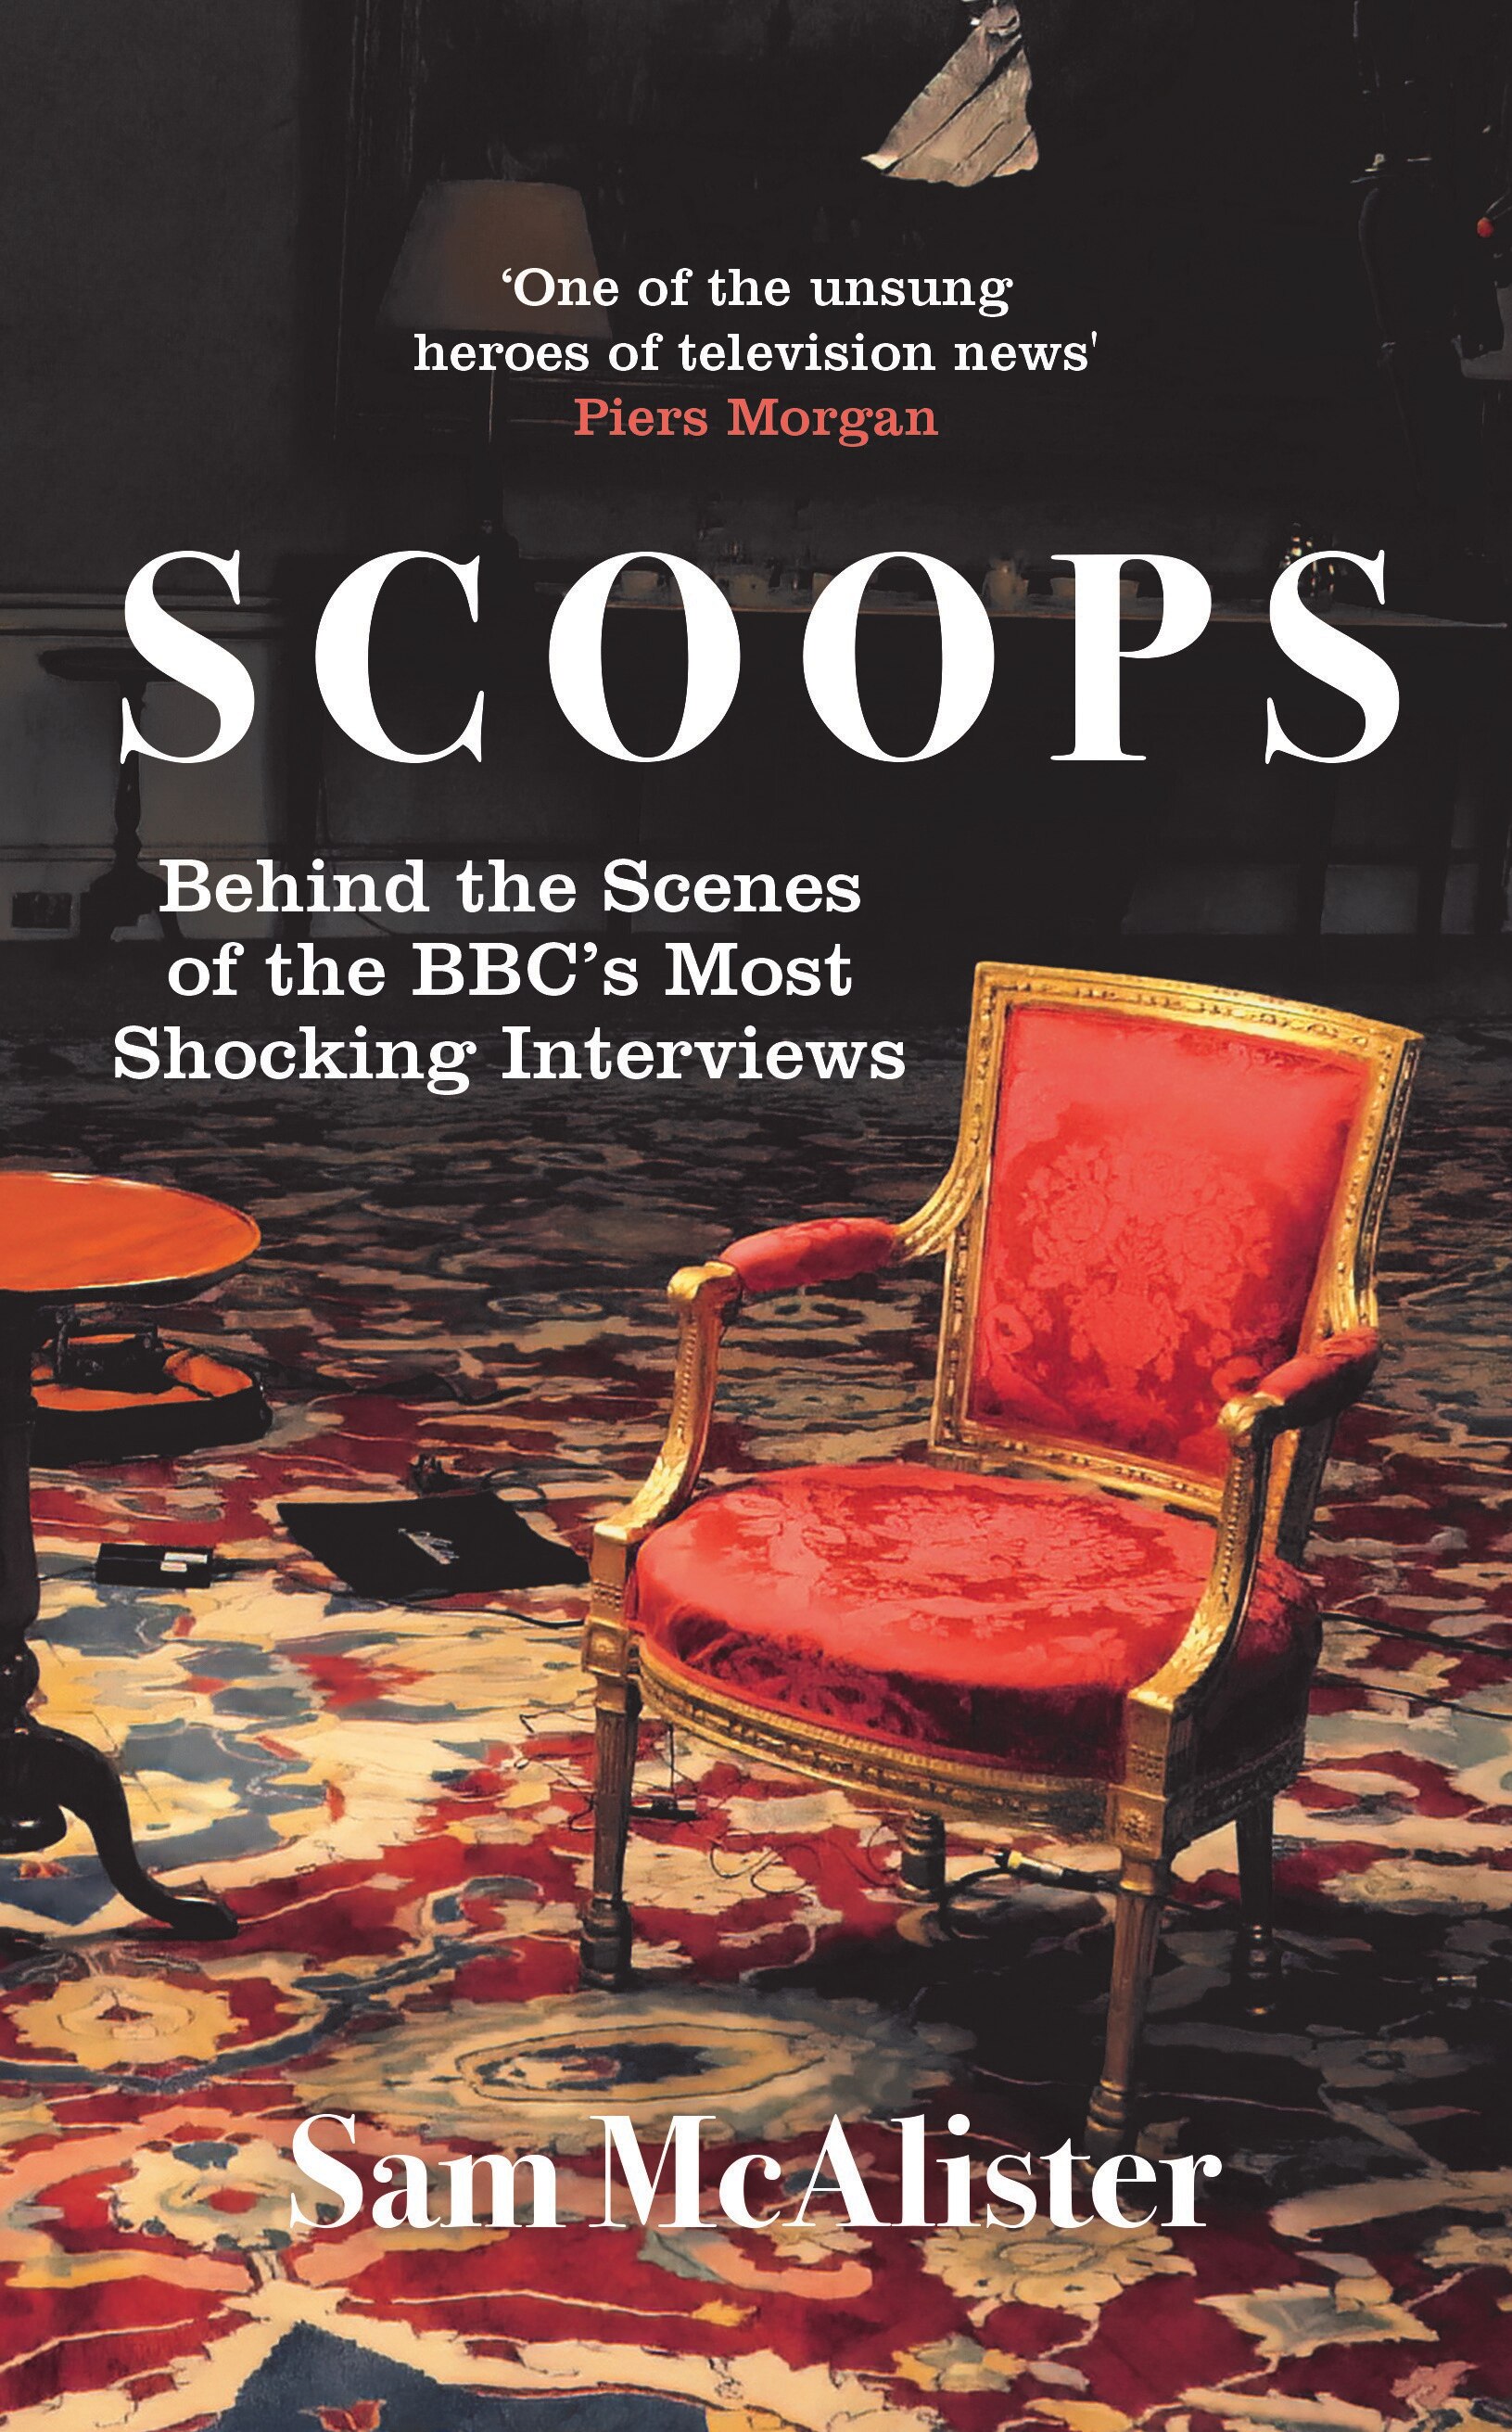 The book cover to Scoops by Sam McAlister, featuring an empty chair